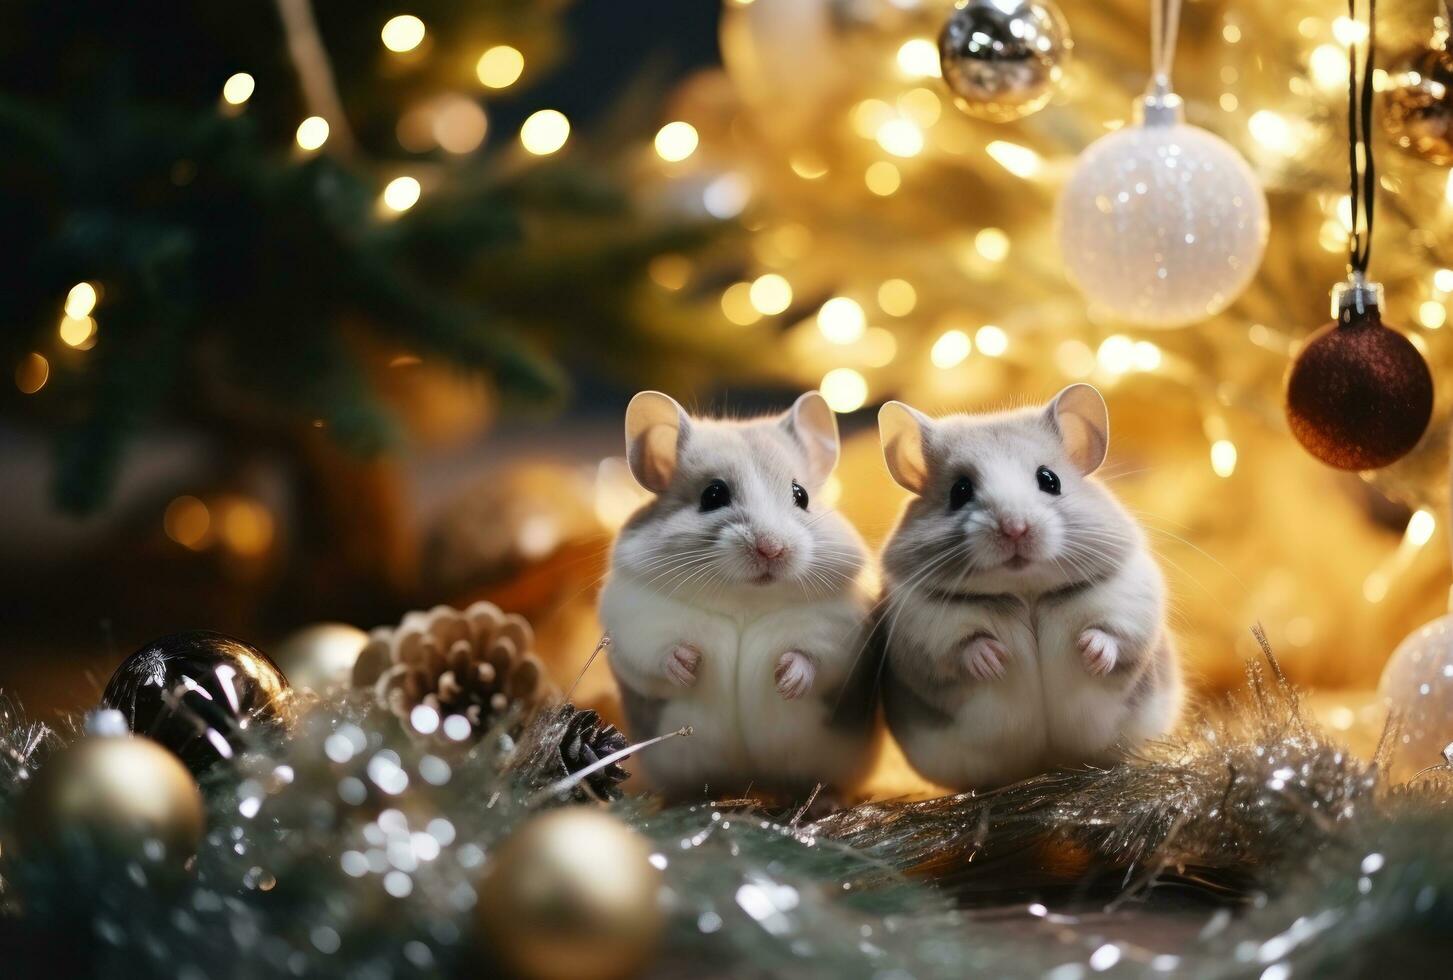 Chinchilla are sitting on the New Year tree, holding small decorated gifts in their paws photo